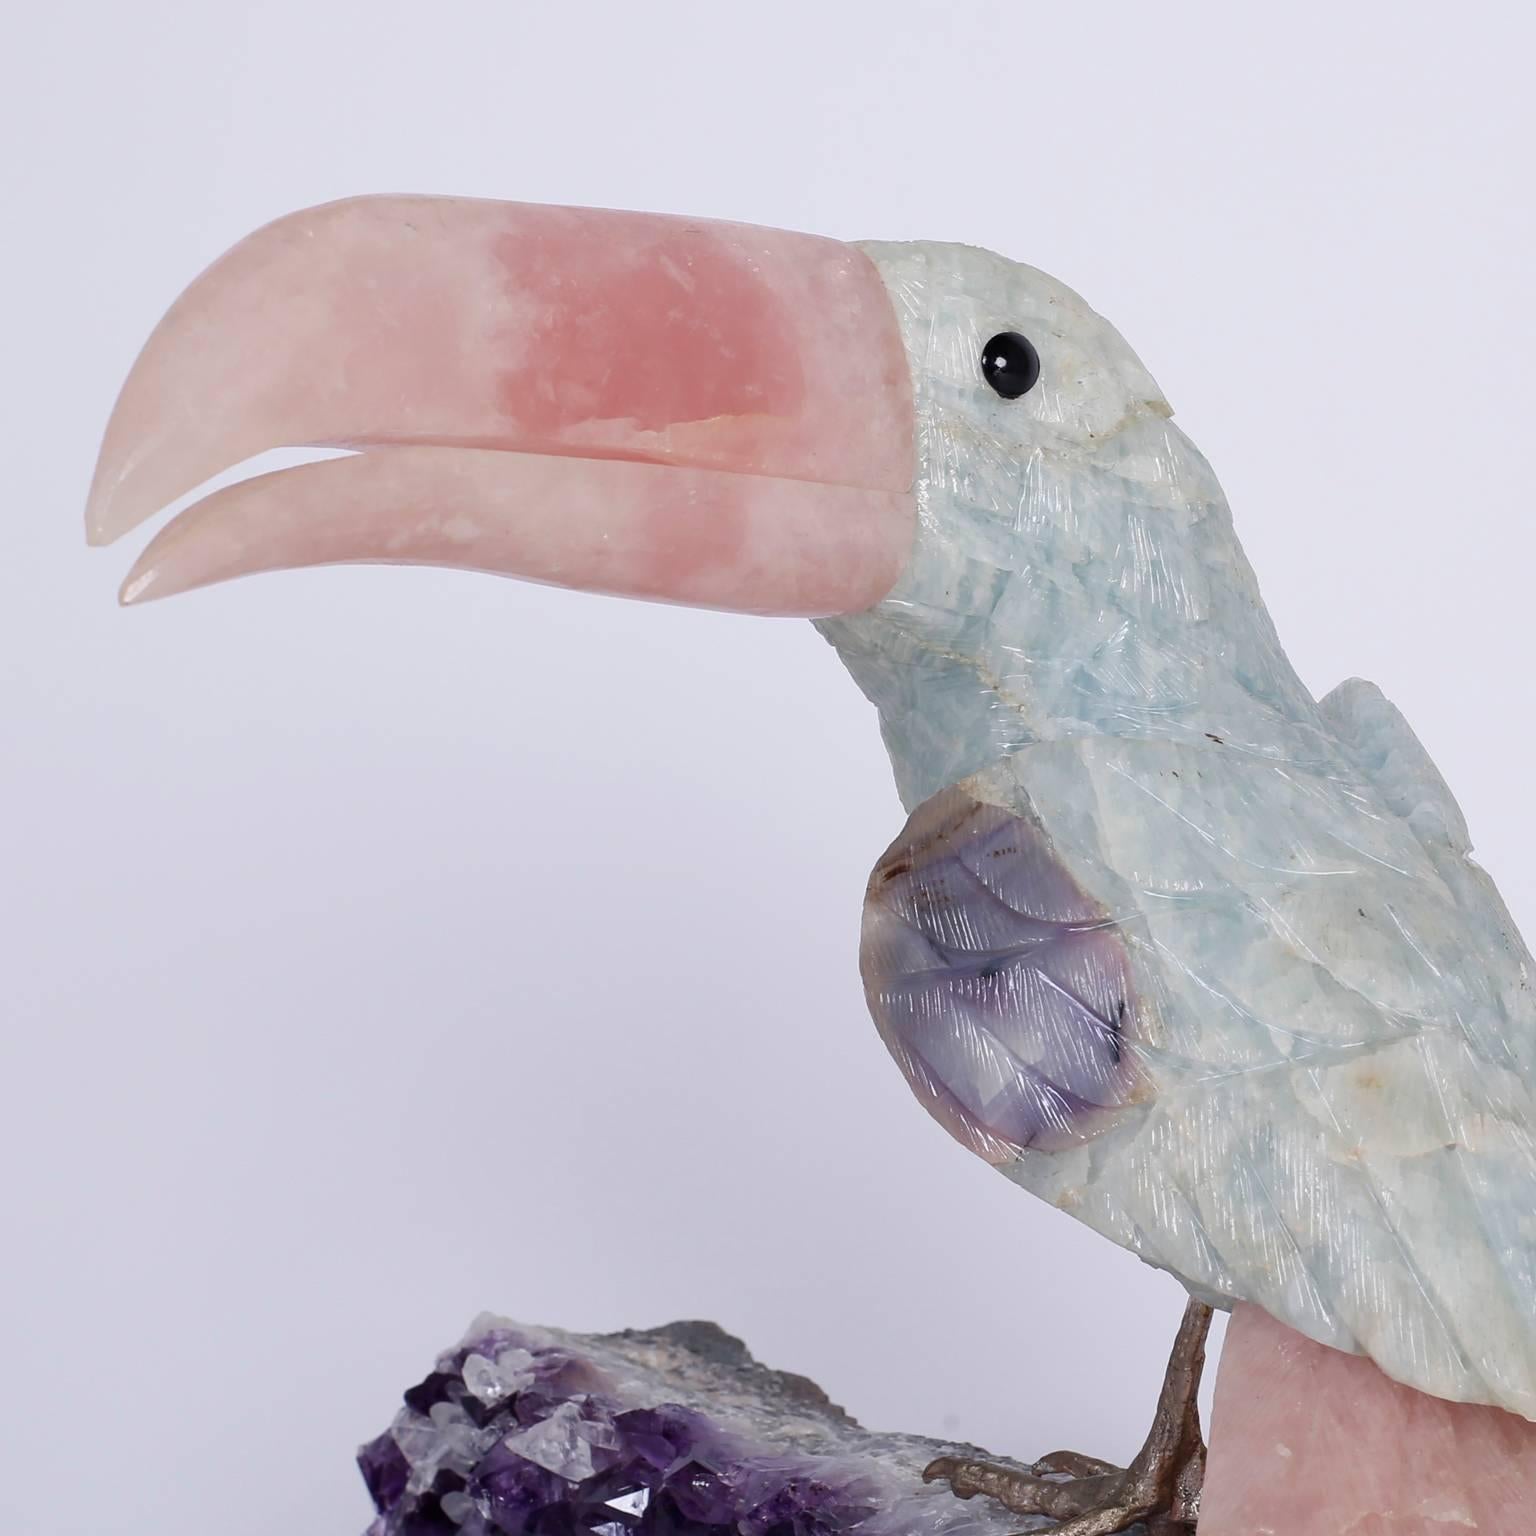 Stone toucan carved from quartz with its iconic profile and amusing personality set on brass feet perched on an amethyst geode specimen.